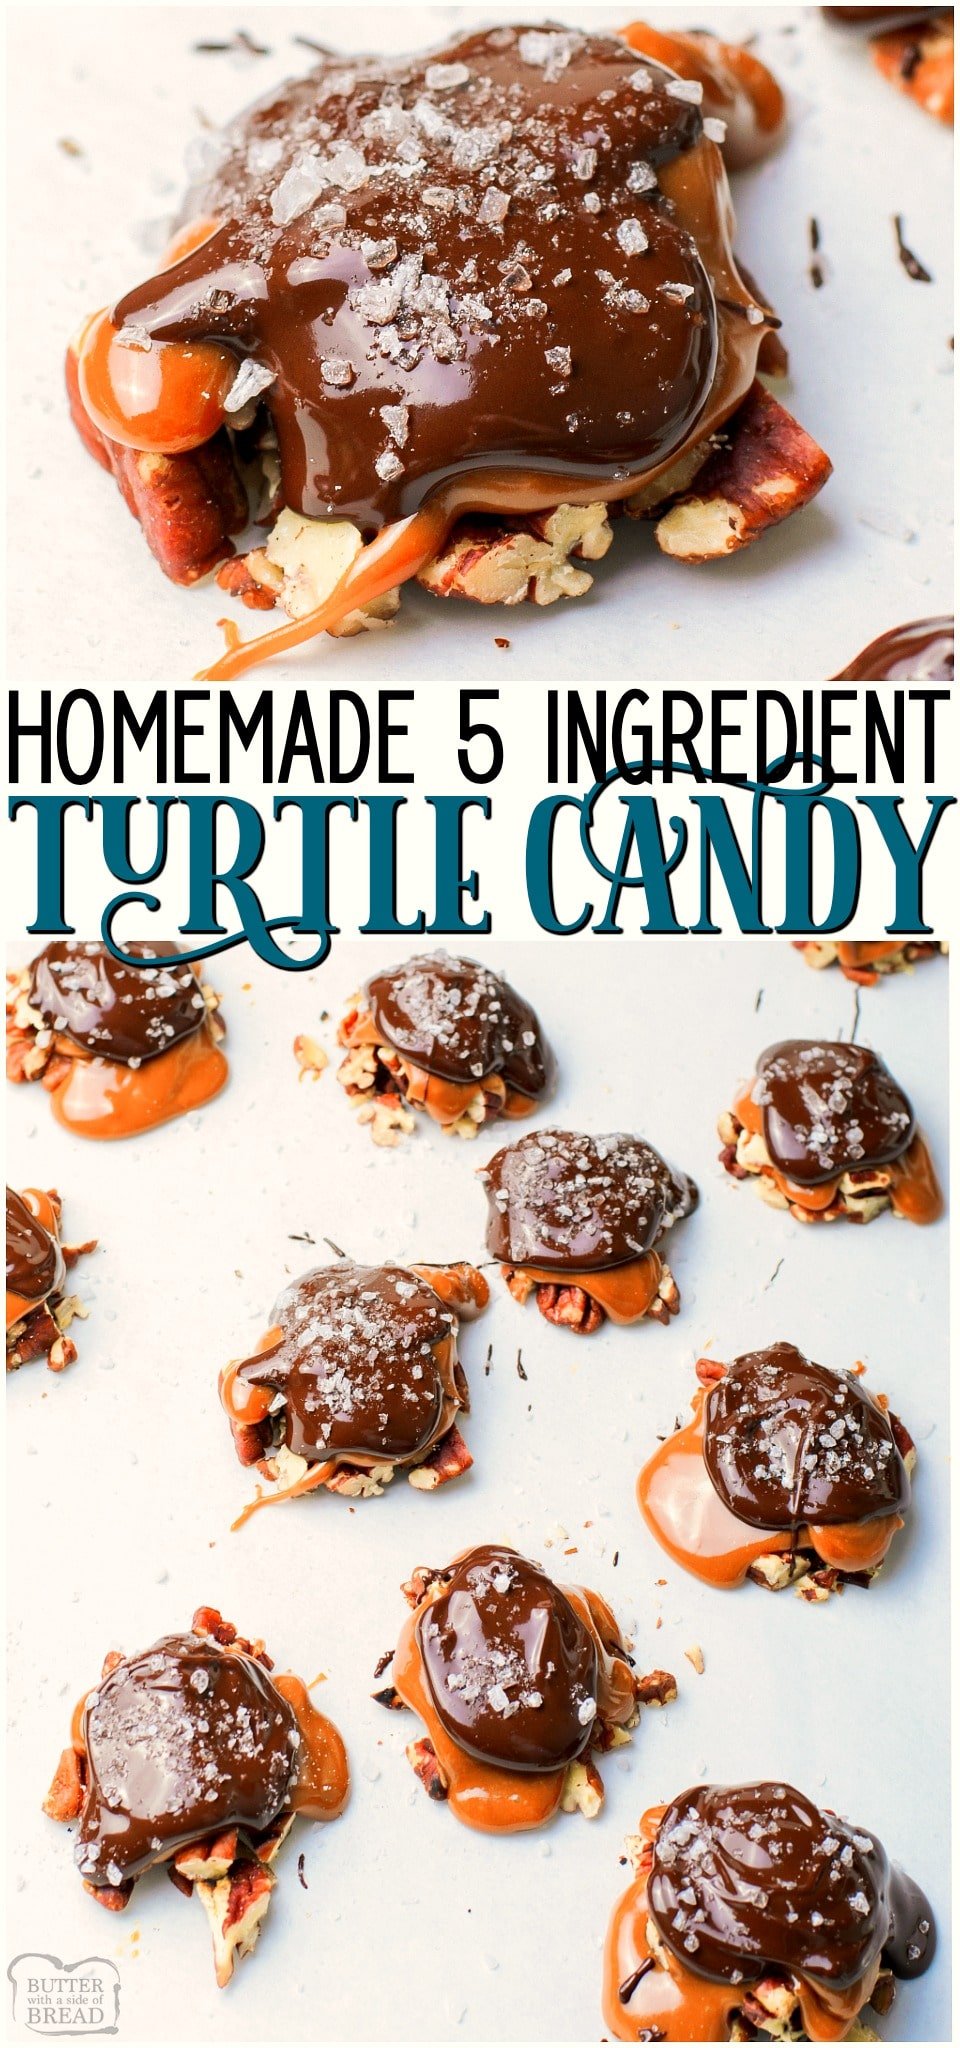 Homemade turtle candy recipe with just 5 ingredients & perfect for holiday dessert trays! With toasted pecans, melted chocolate, and gooey caramel in every bite, these easy to make candies are a perfect treat!